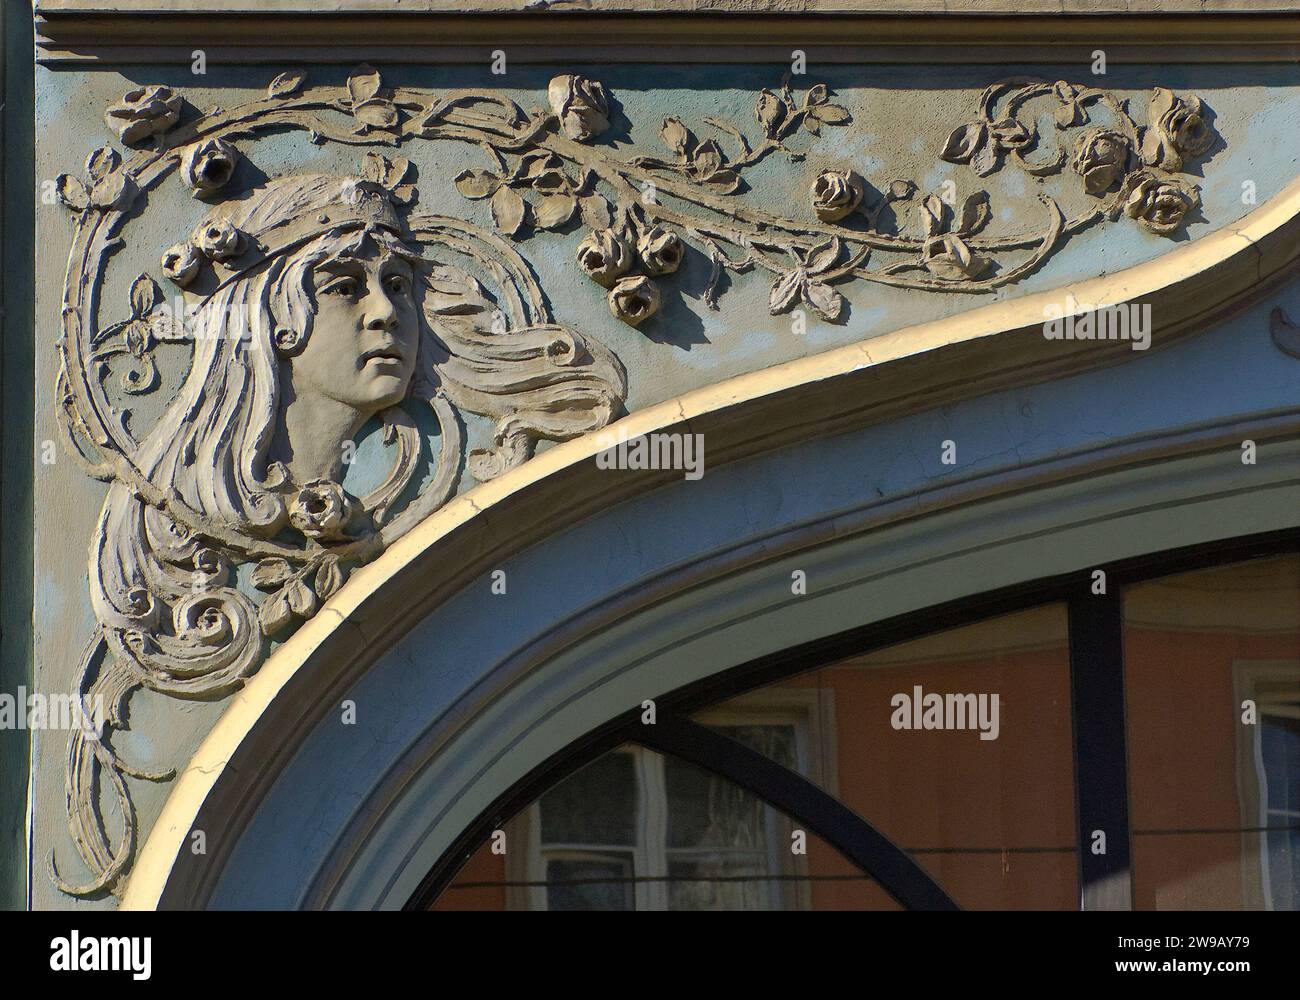 Details at Art Nouveau building at Ruska Street in Wrocław, Lower Silesia region, Poland Stock Photo